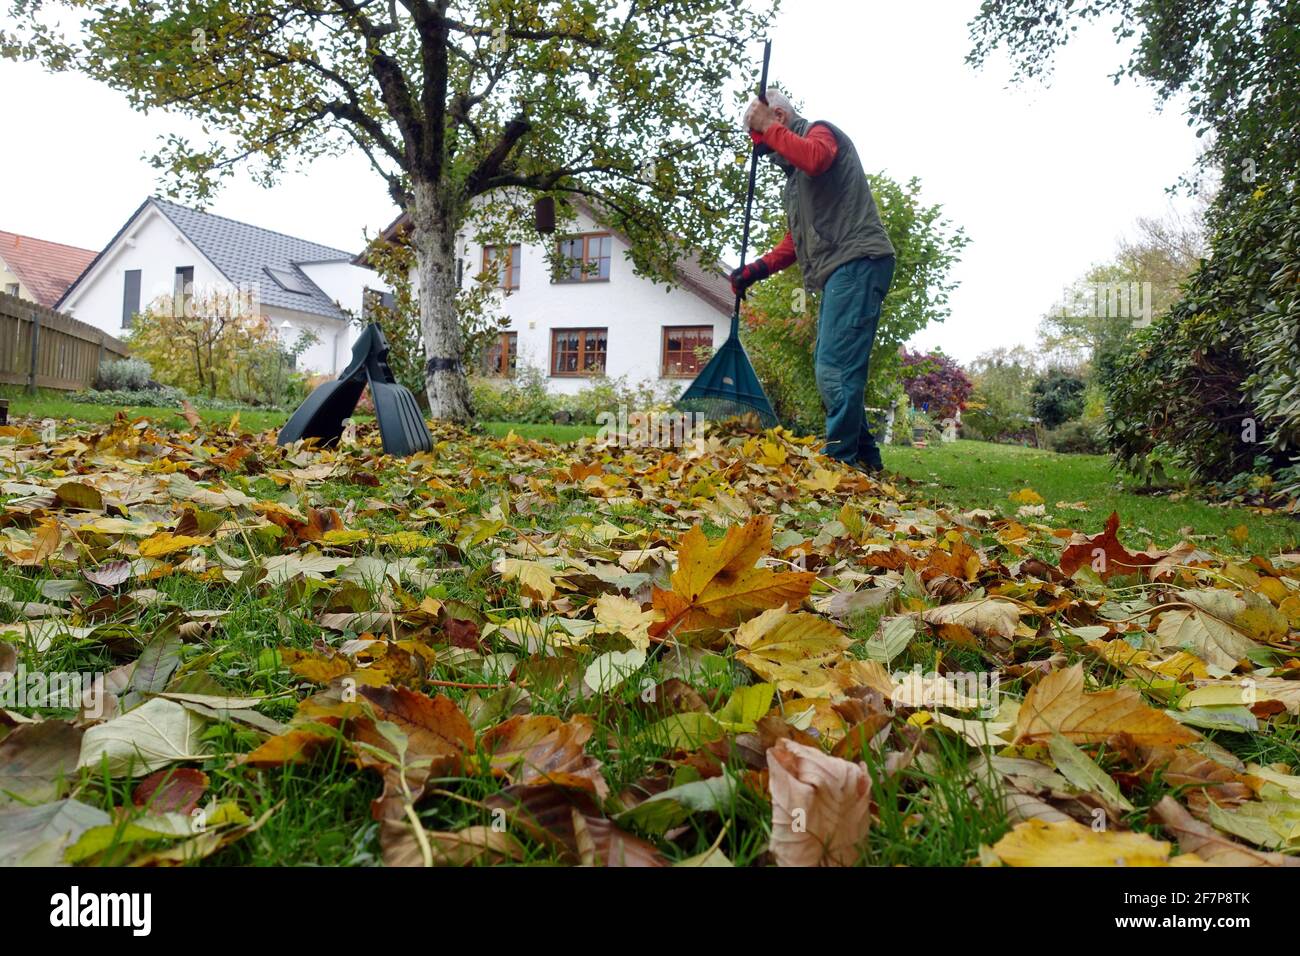 man removing autumn leaves from the lawn in front of a country-style detached house , Germany Stock Photo